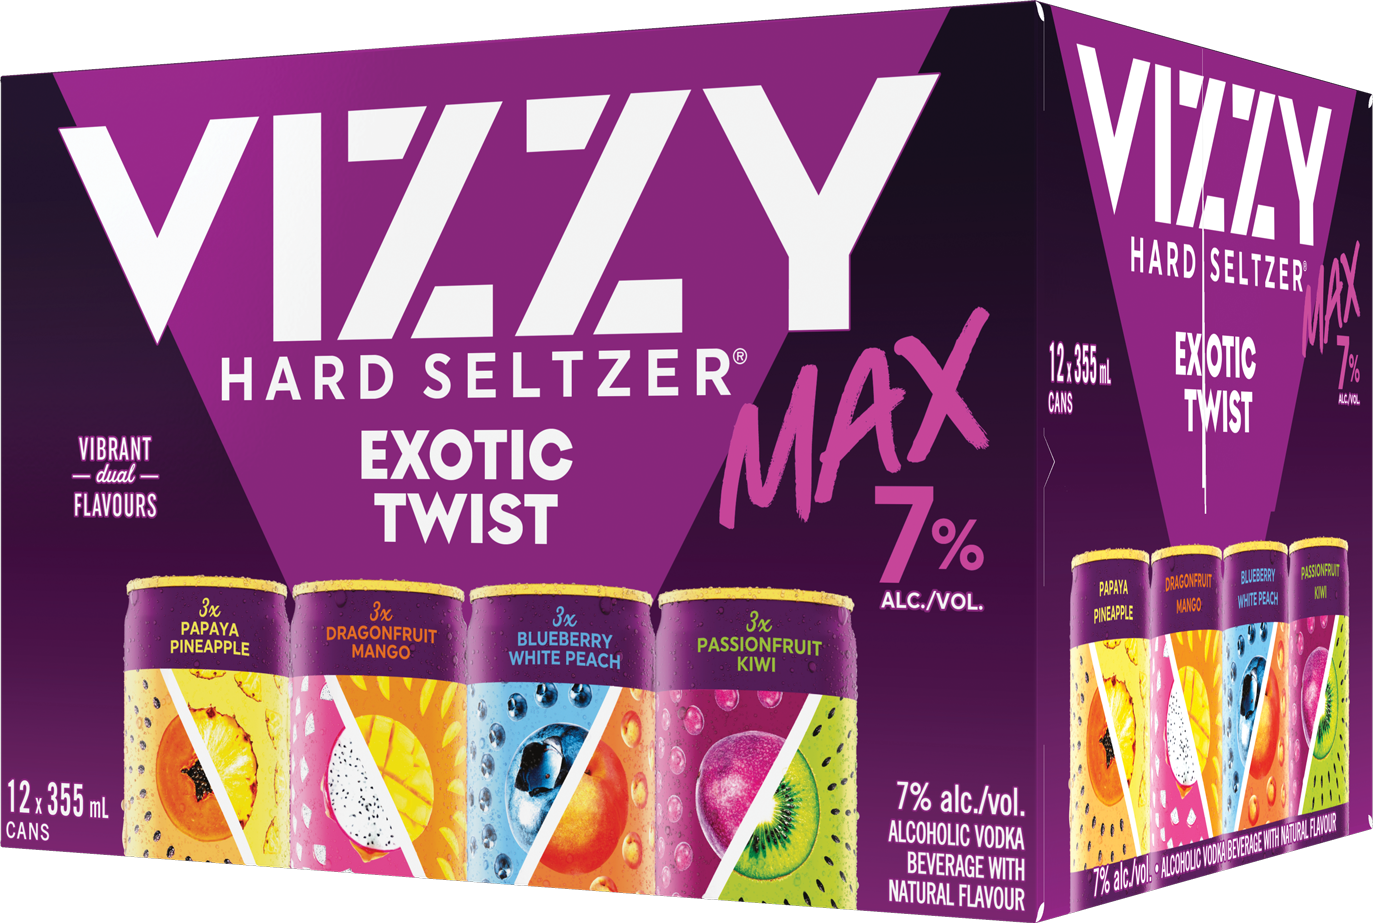 Packaging for Vizzy Hard Seltzer MAX with various fruit flavors displayed. There are no people in the image